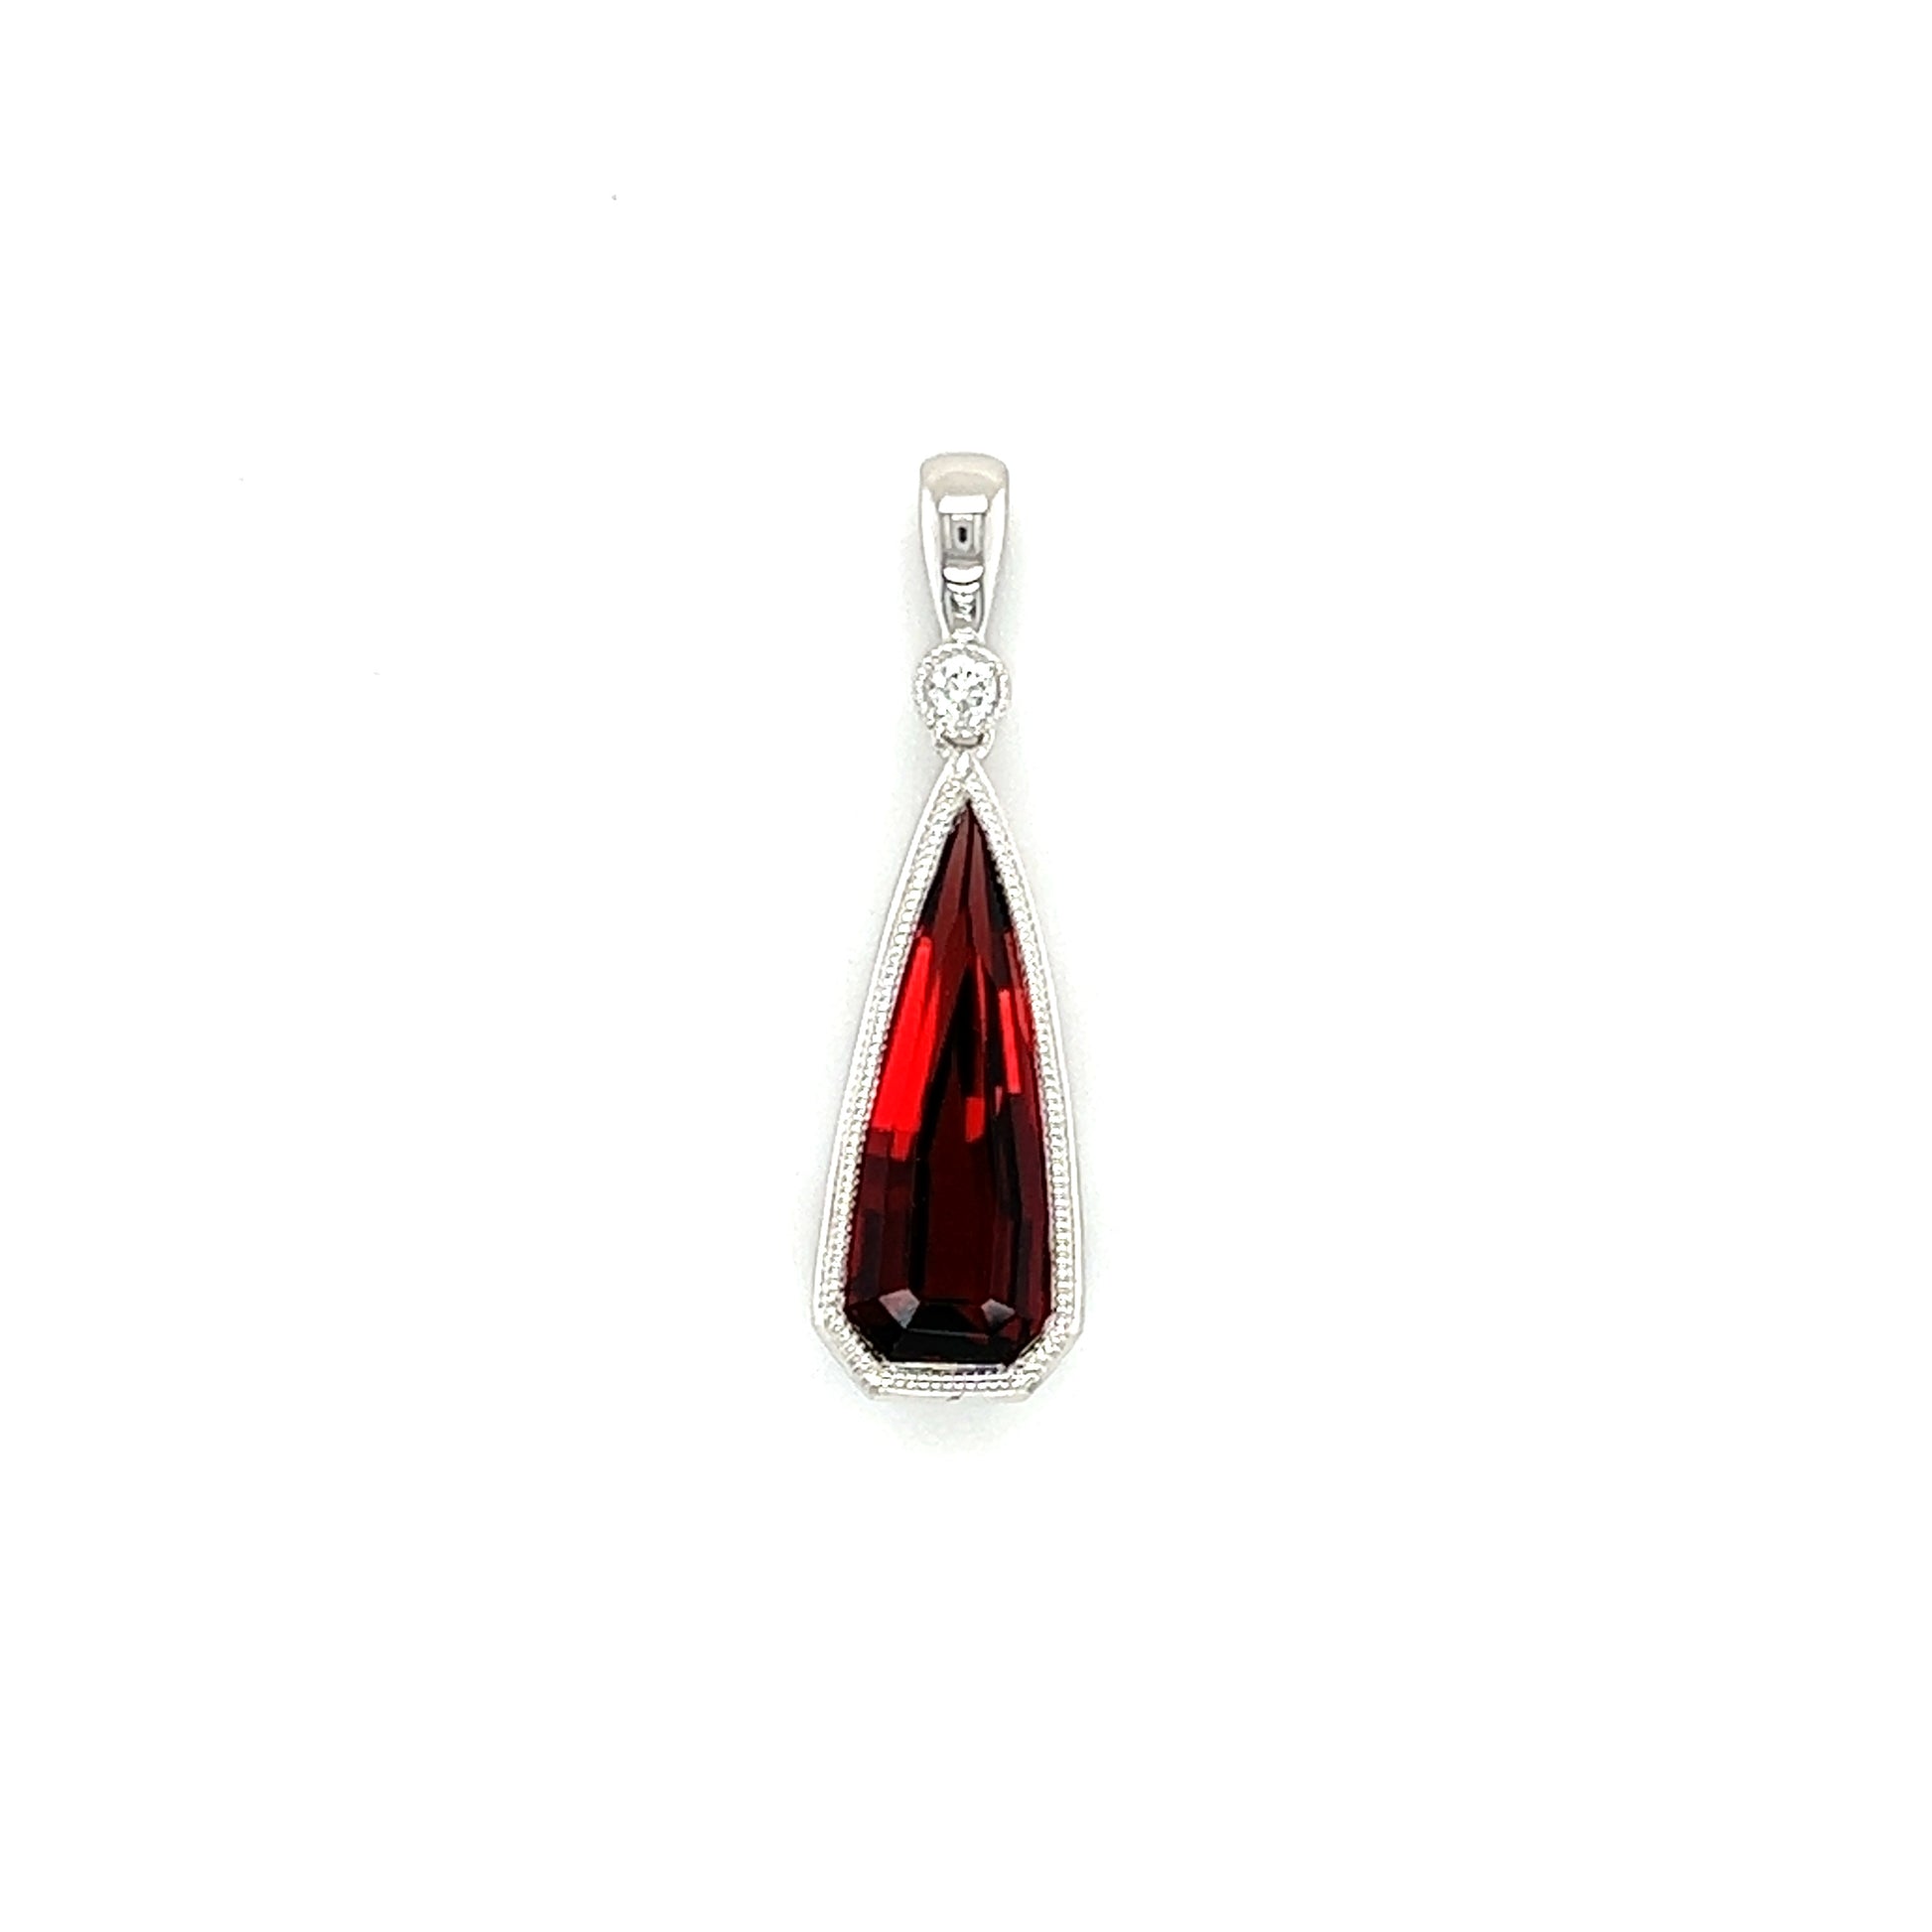 Irregular Garnet Pendant with Diamonds Accent in 14K White Gold Pendant Top View